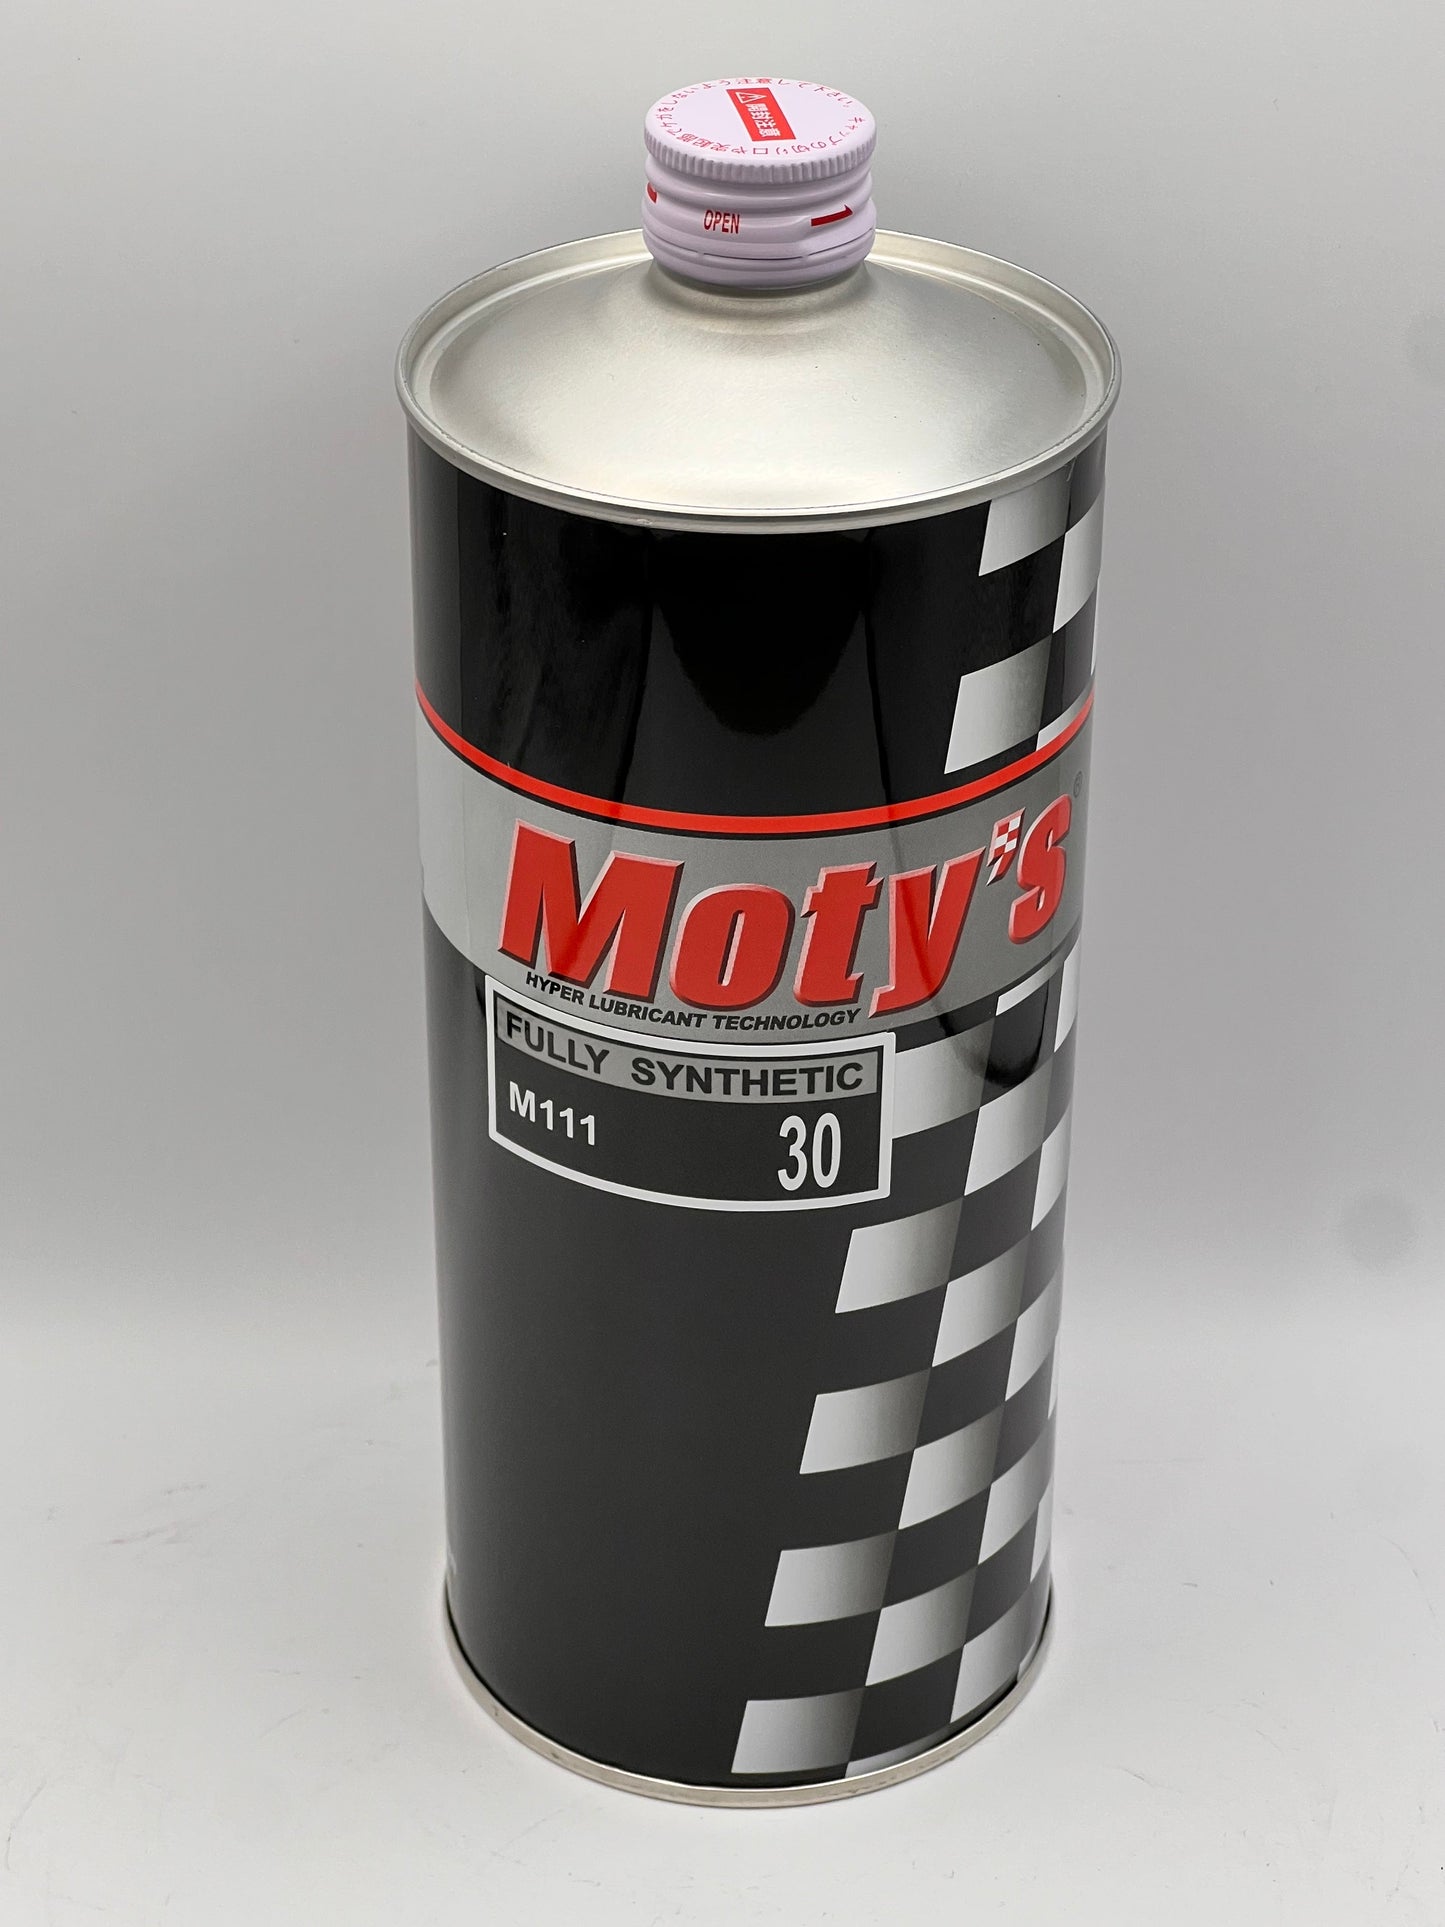 Moty's Racing Motor Oil Fully Synthetic M111(30) 5w30 1 Litre Can